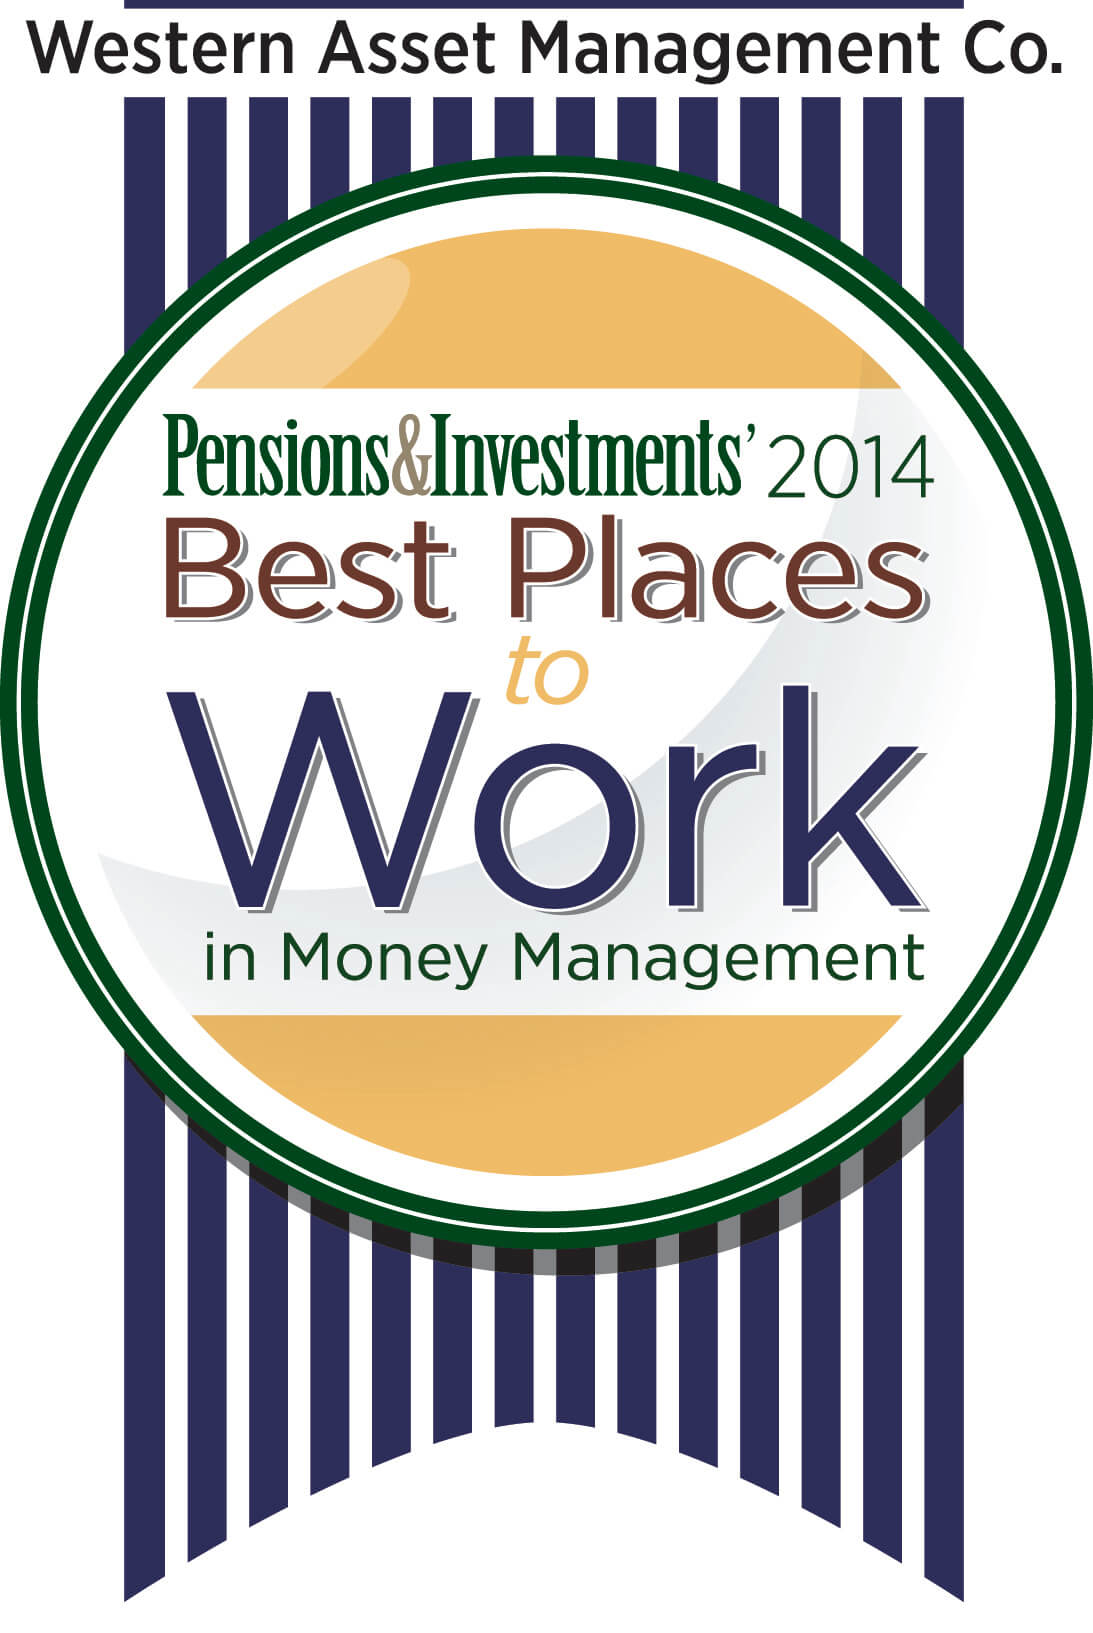 P&I Best Places to Work 2014 Award